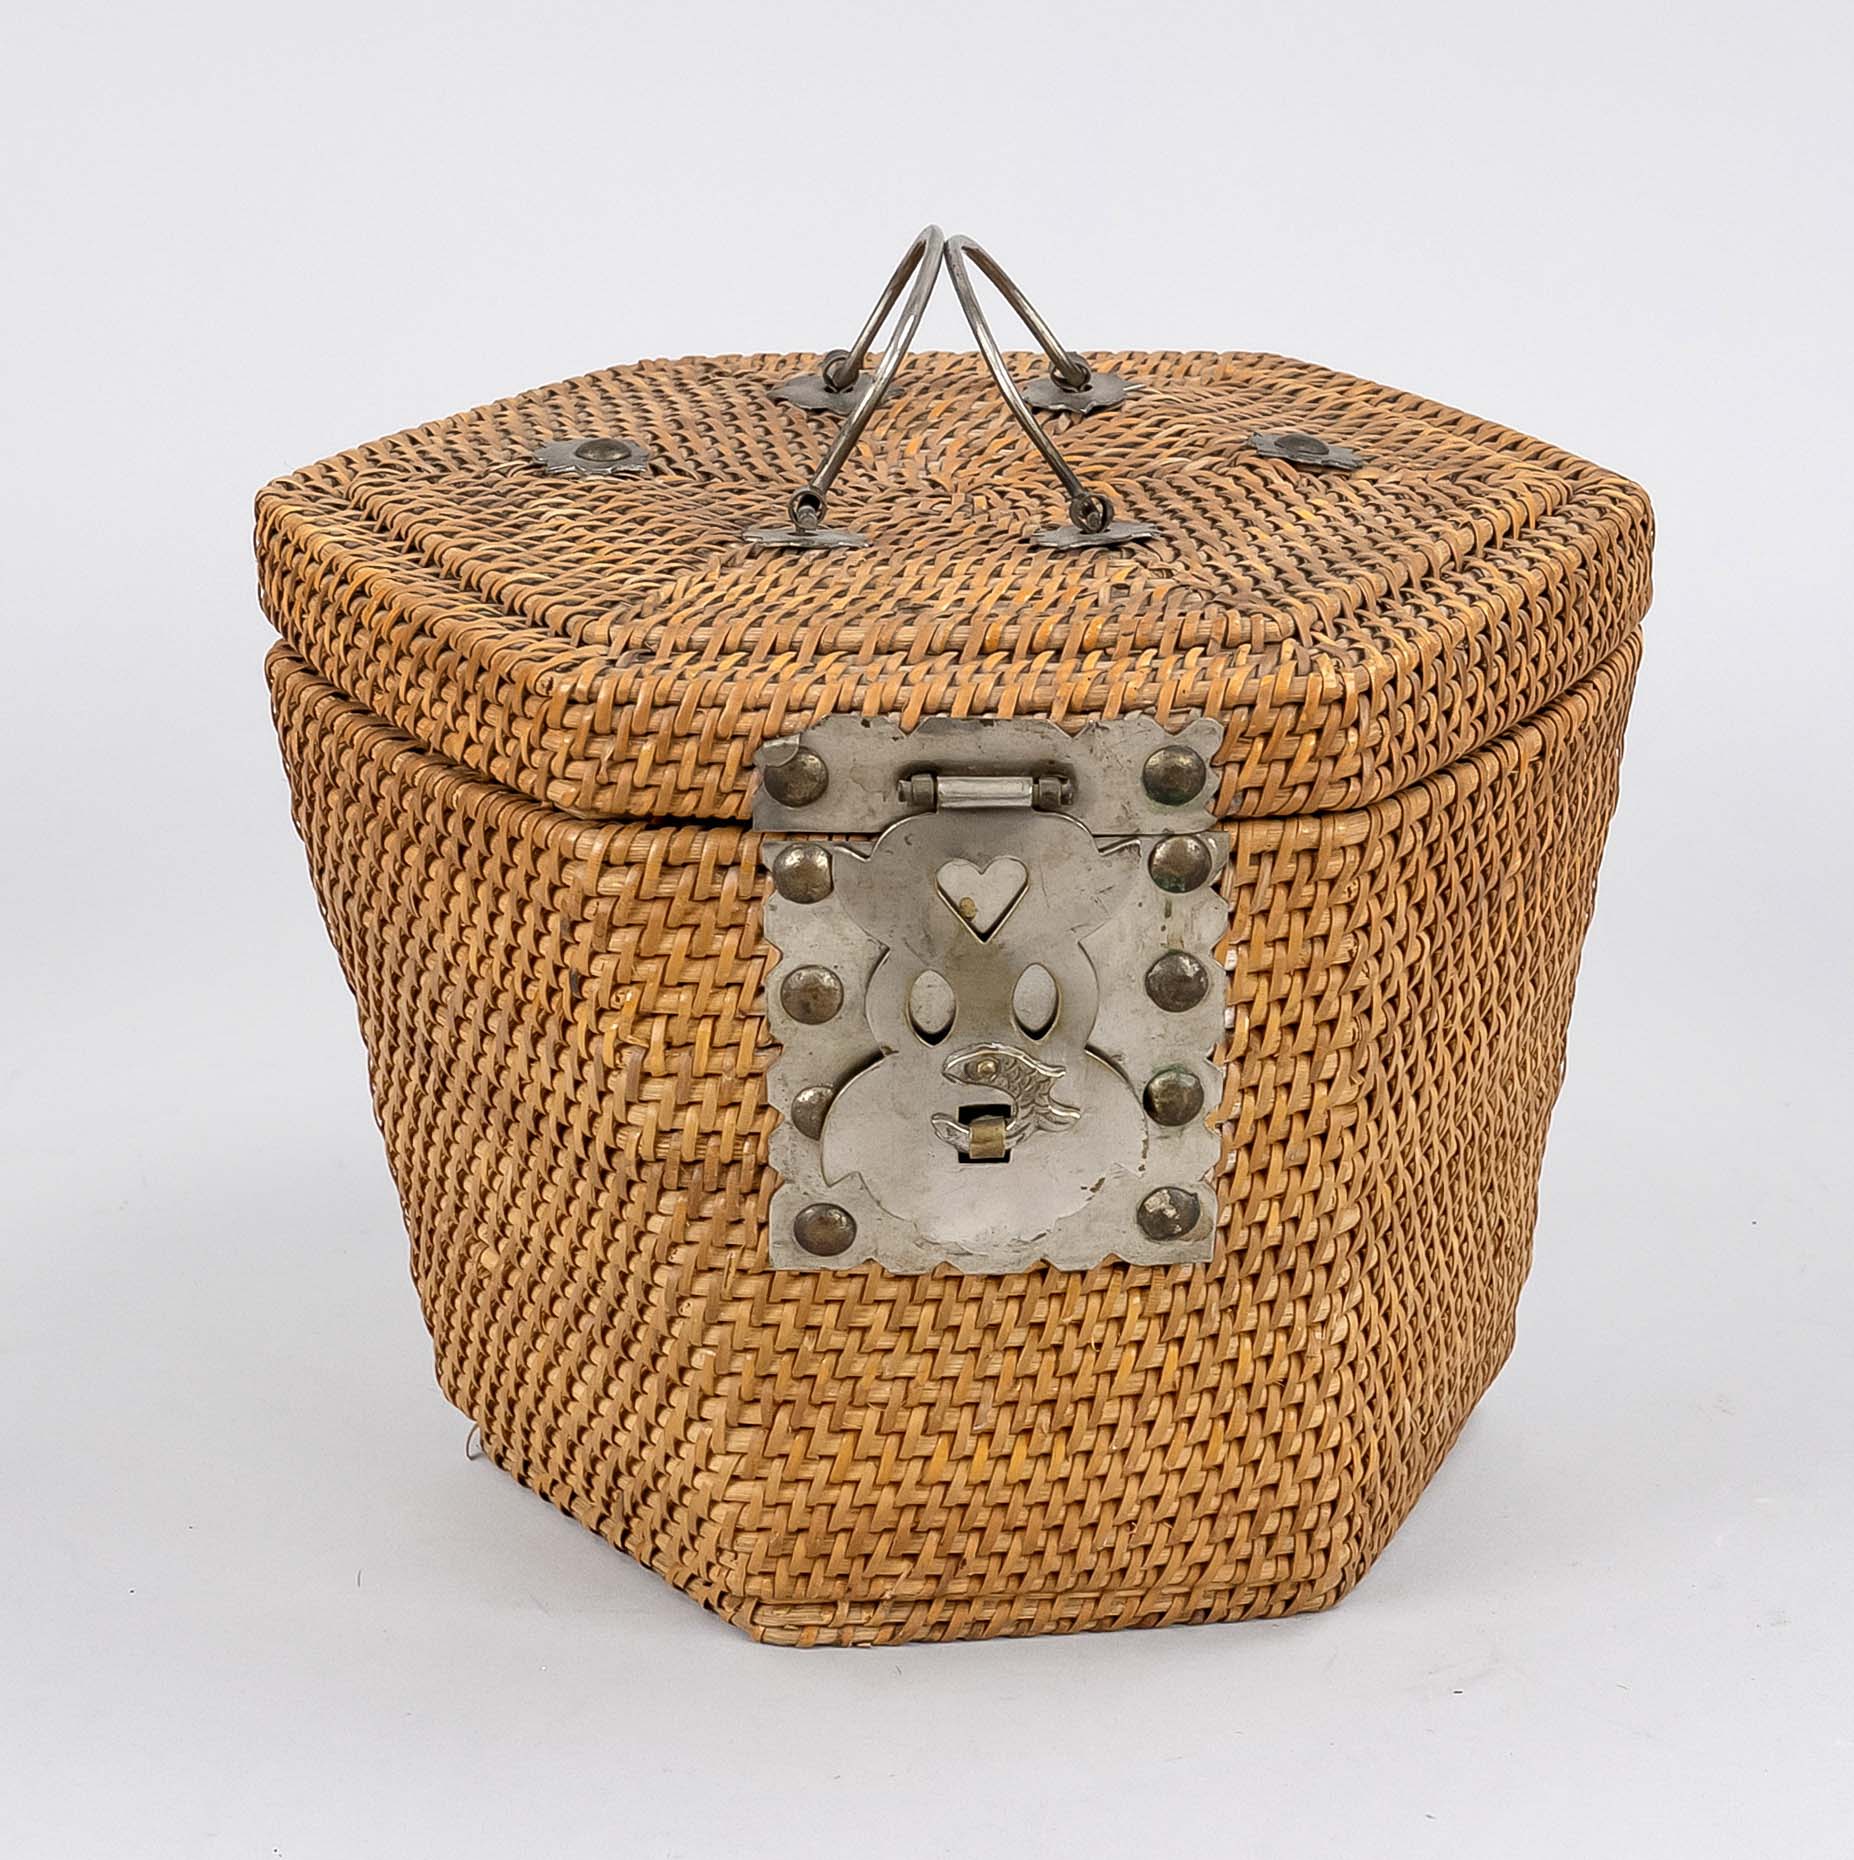 Tea set in basket, China, 20th century, porcelain pot and pair of koppchen, polychrome glaze - Image 2 of 2